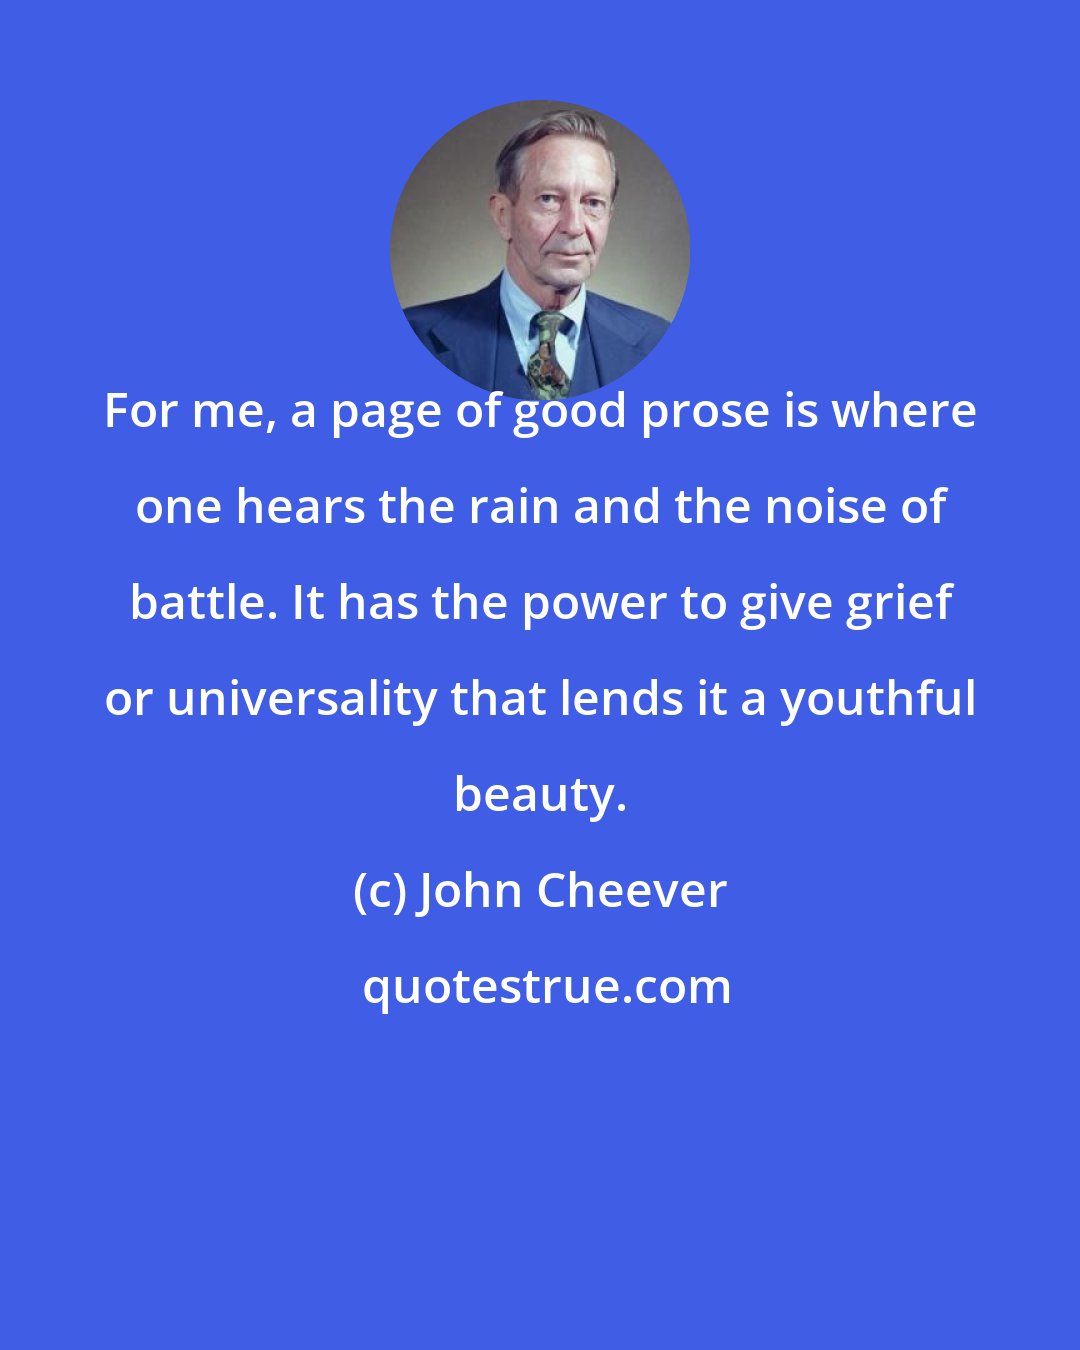 John Cheever: For me, a page of good prose is where one hears the rain and the noise of battle. It has the power to give grief or universality that lends it a youthful beauty.